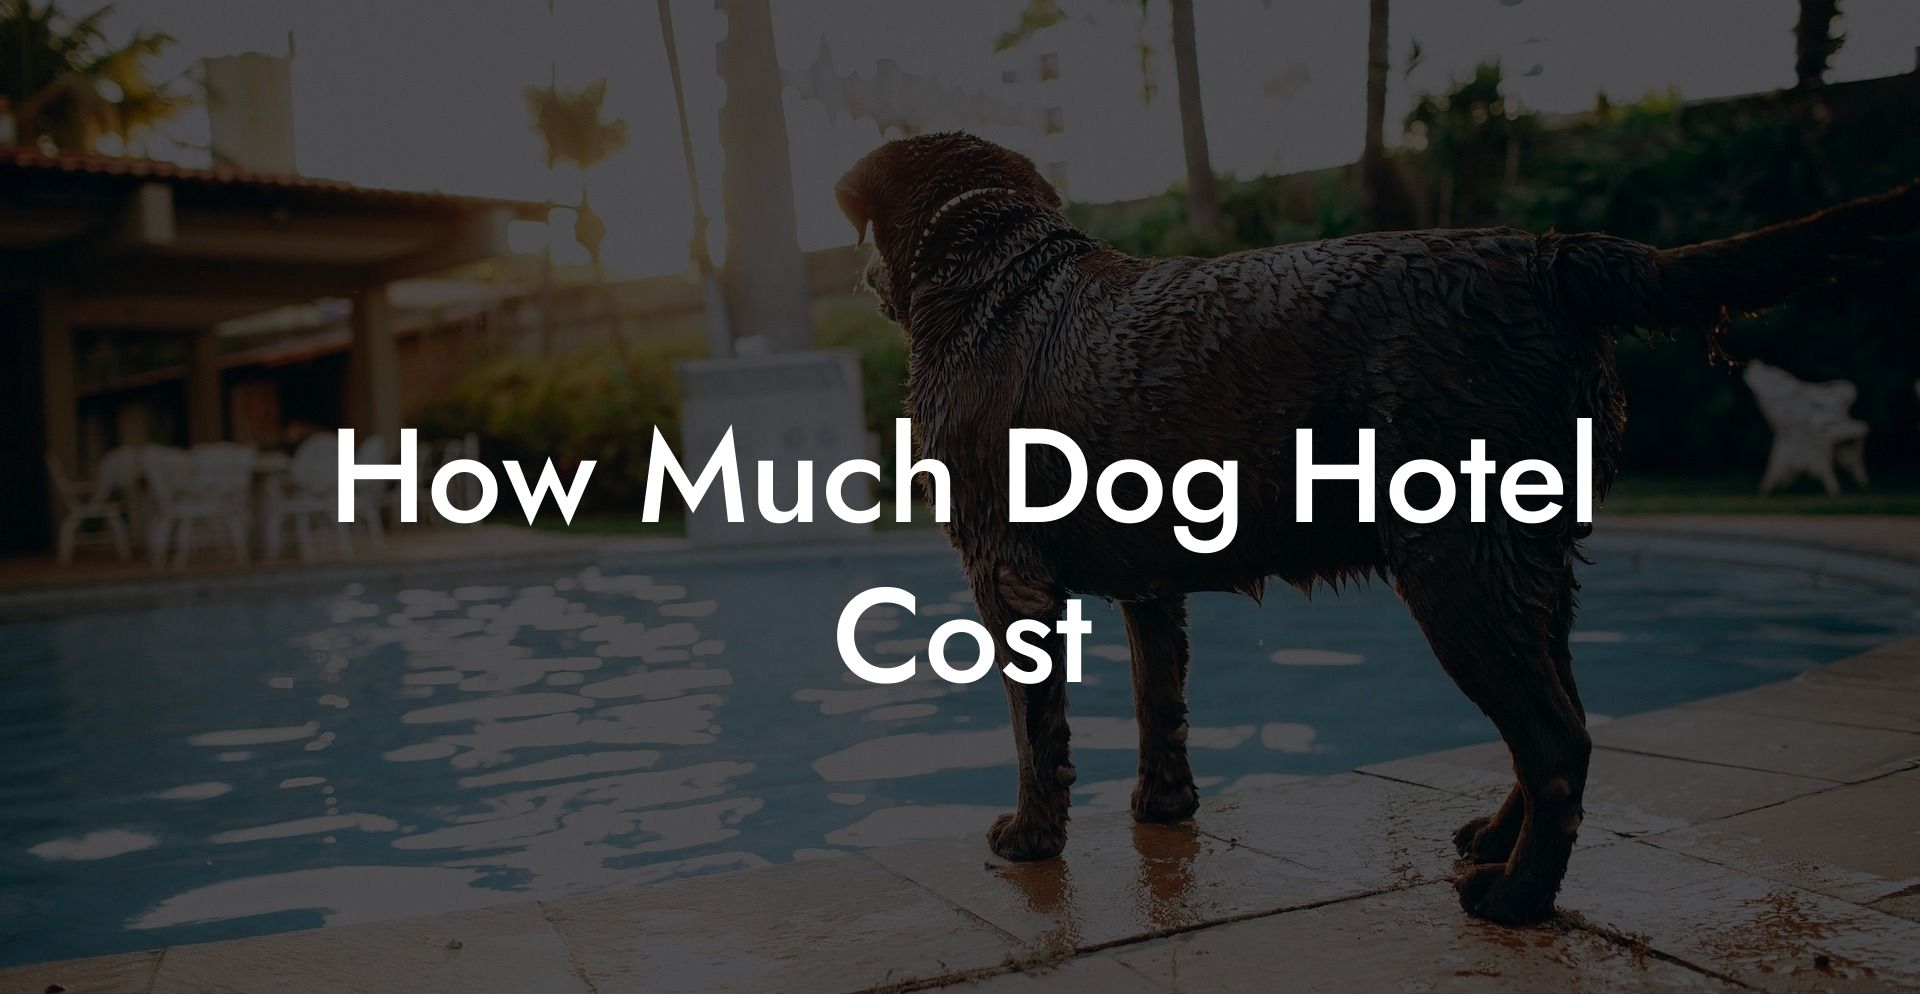 How Much Dog Hotel Cost